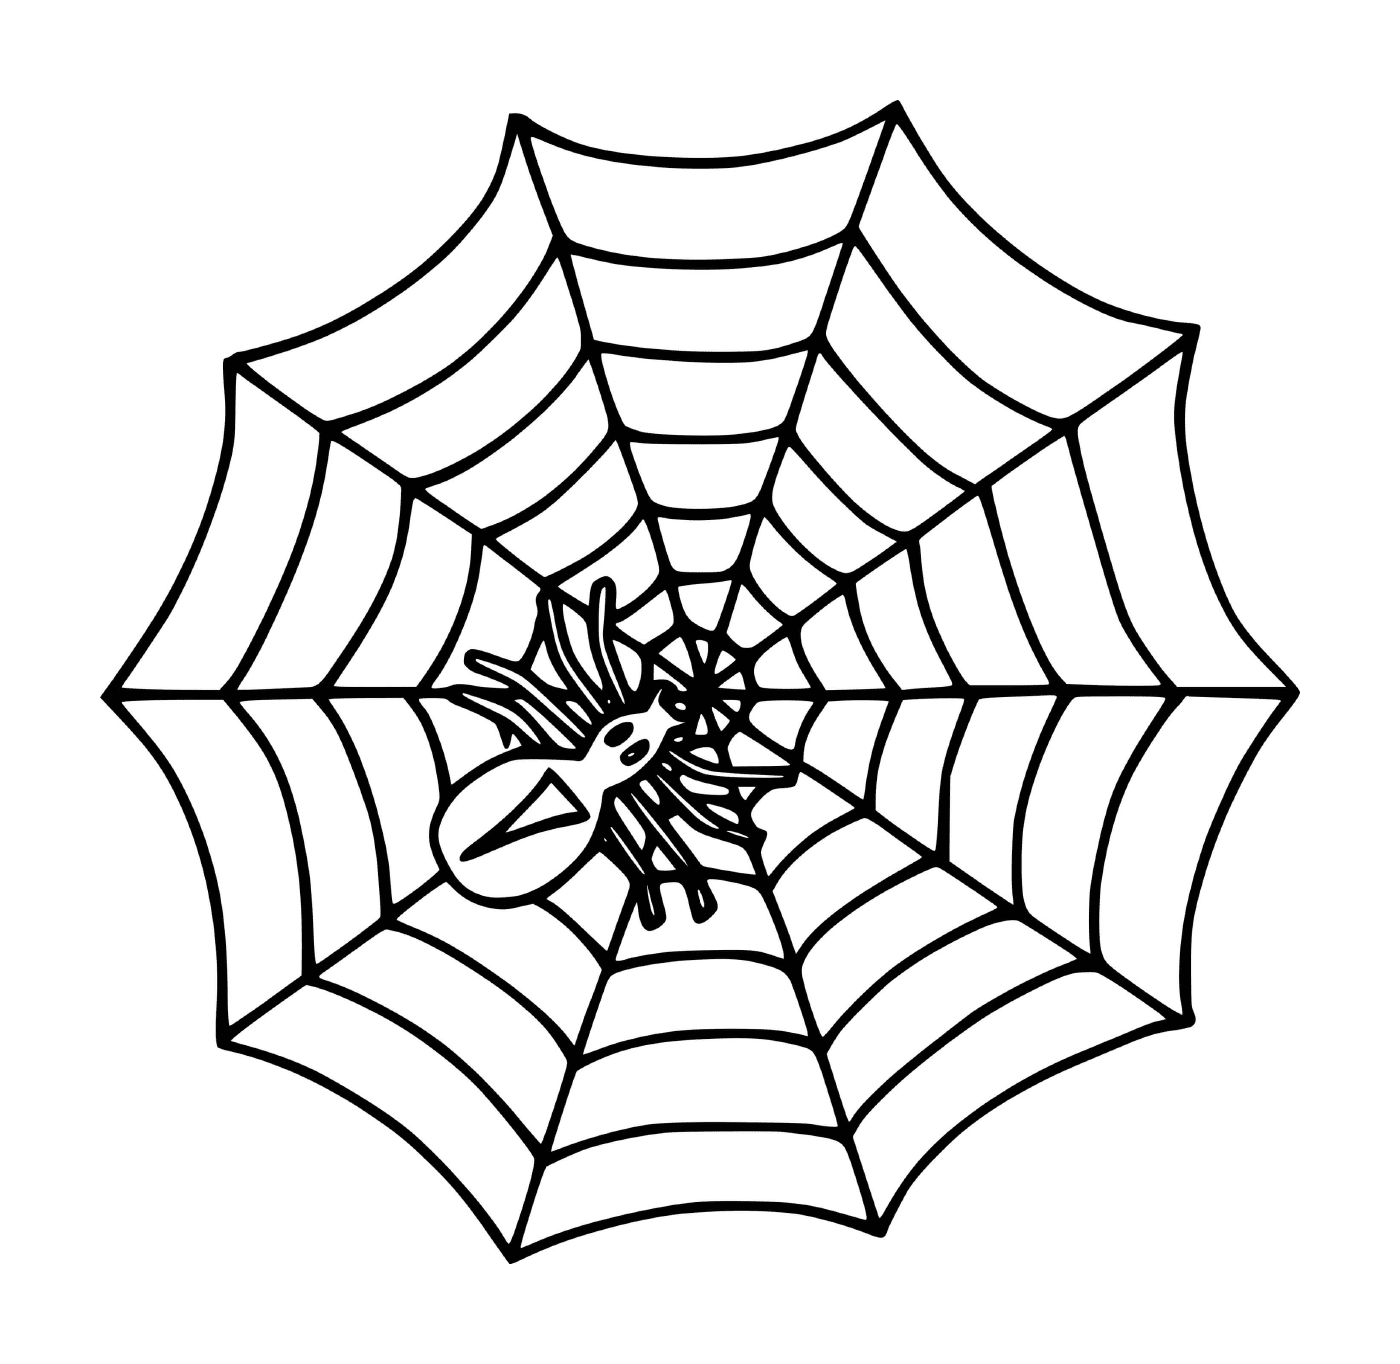  A simple spider 